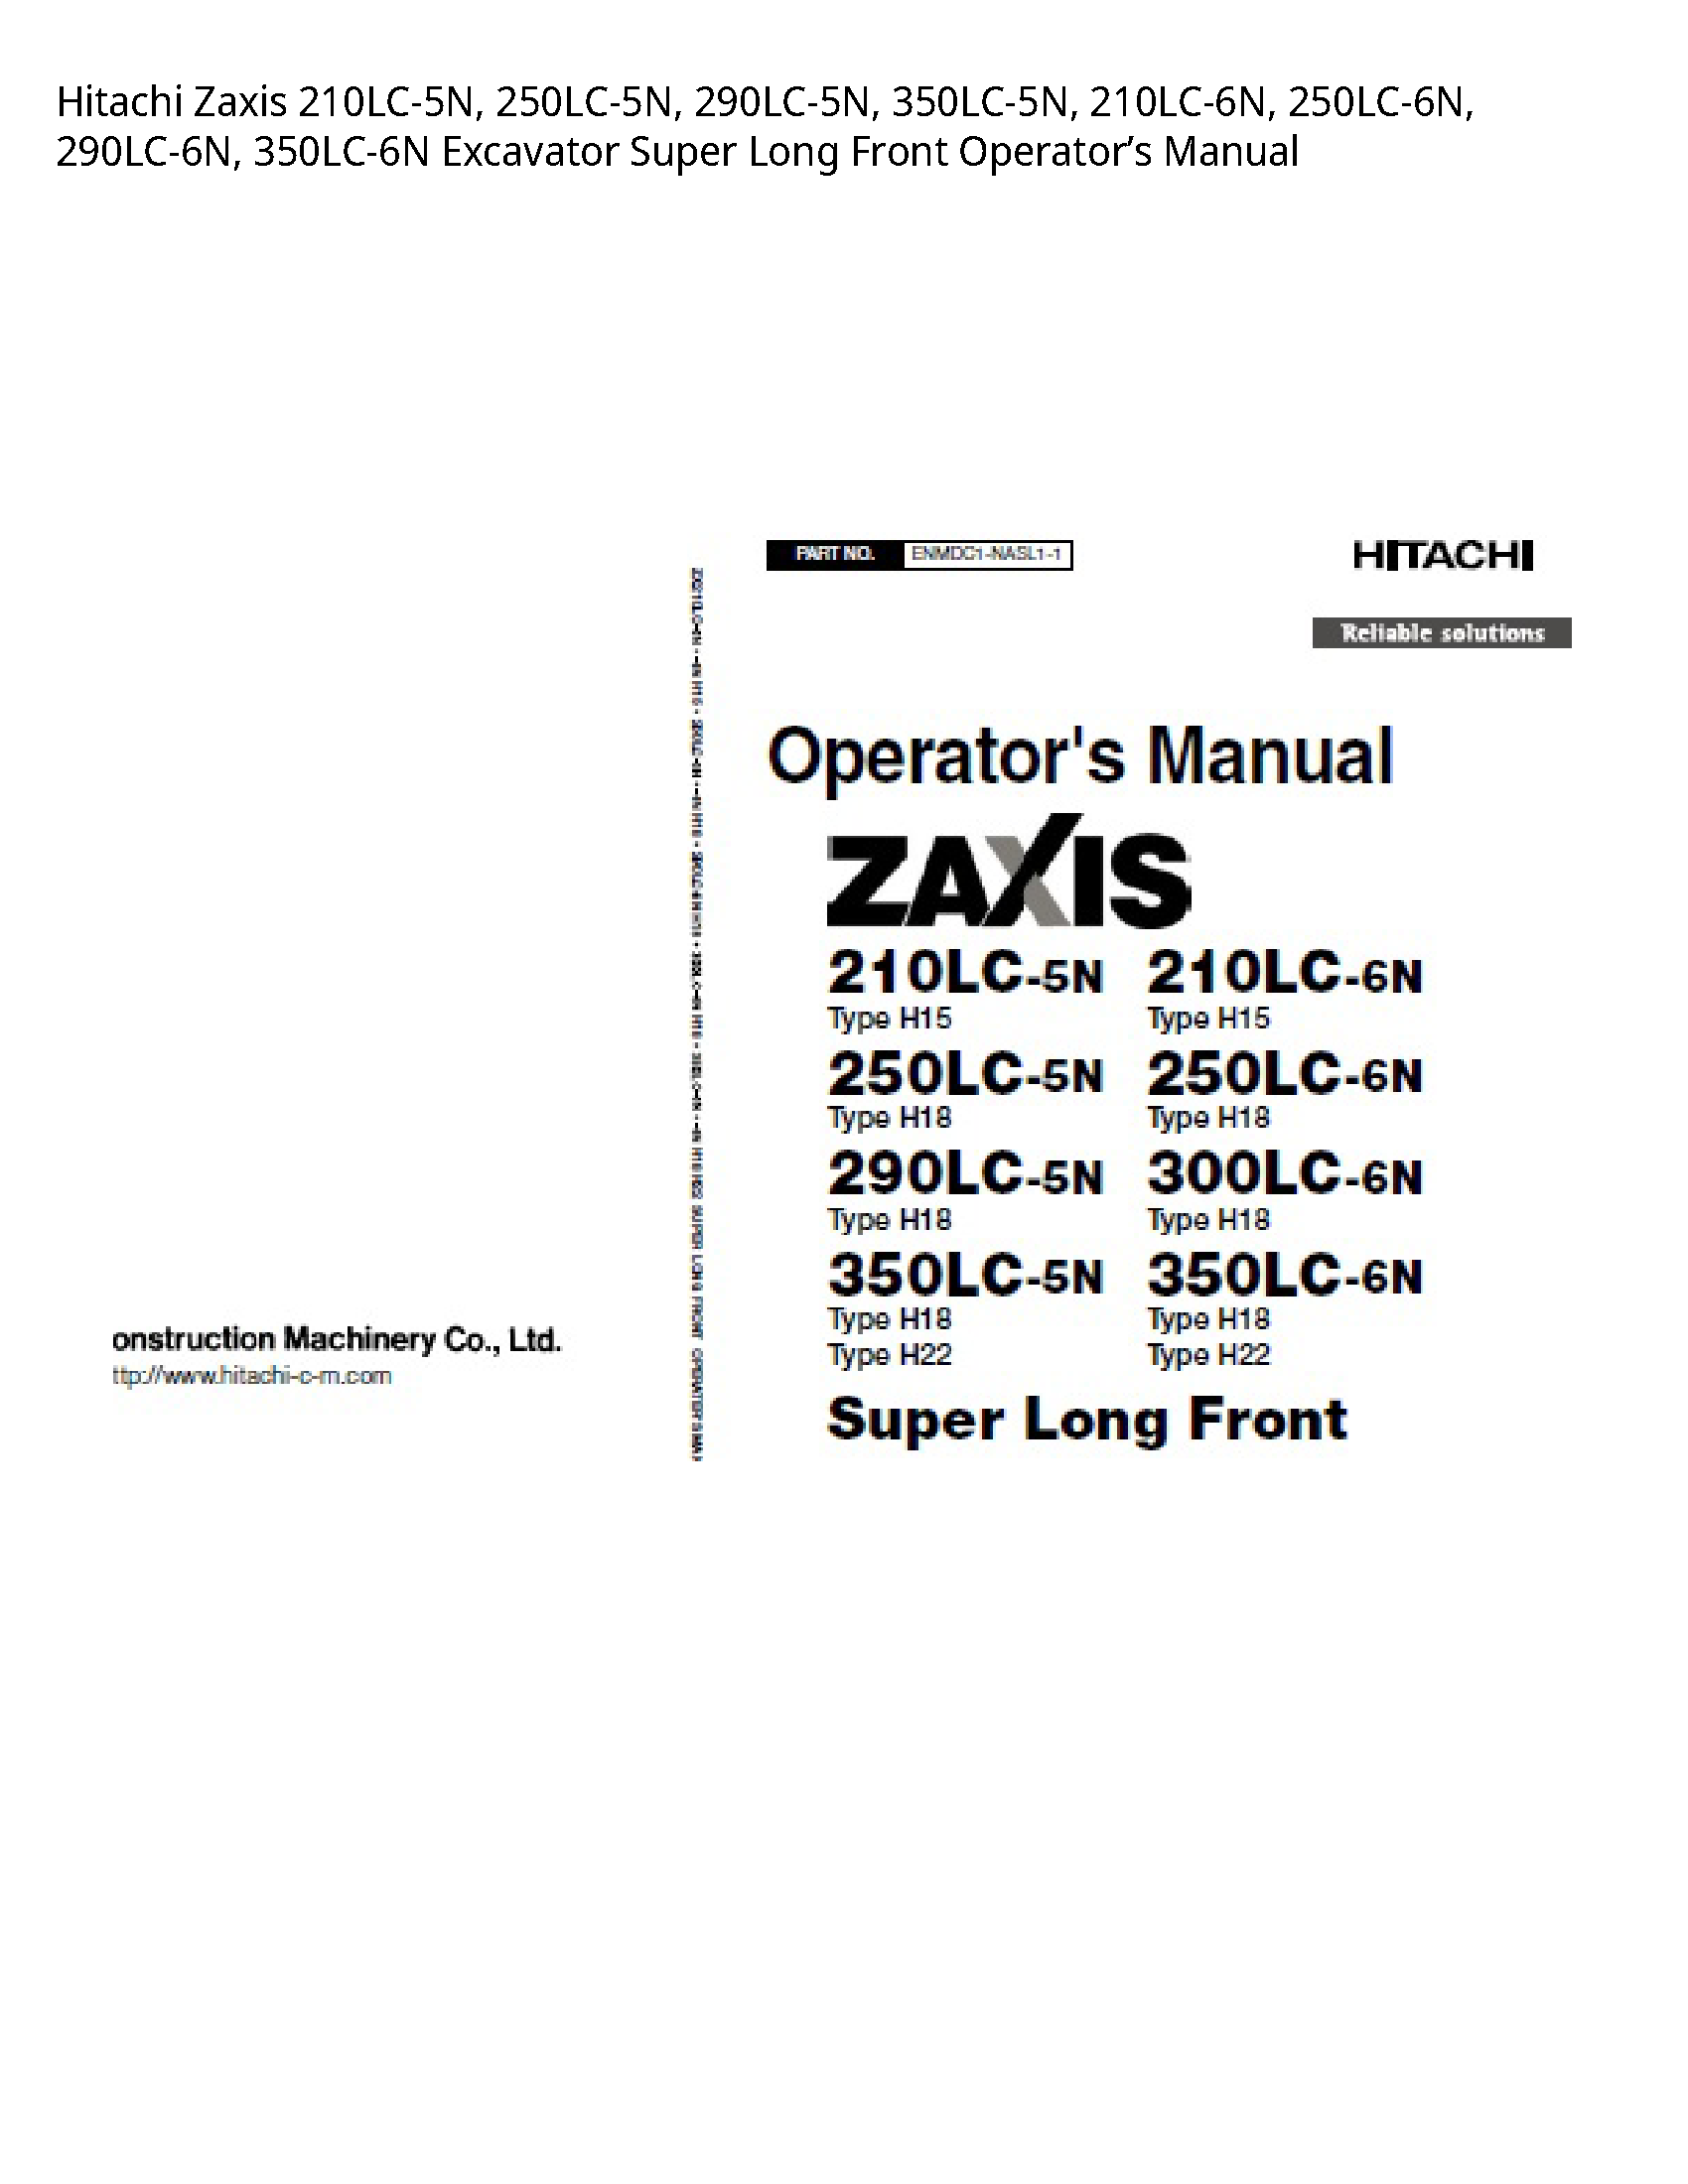 Hitachi 210LC-5N Zaxis Excavator Super Long Front Operator’s manual